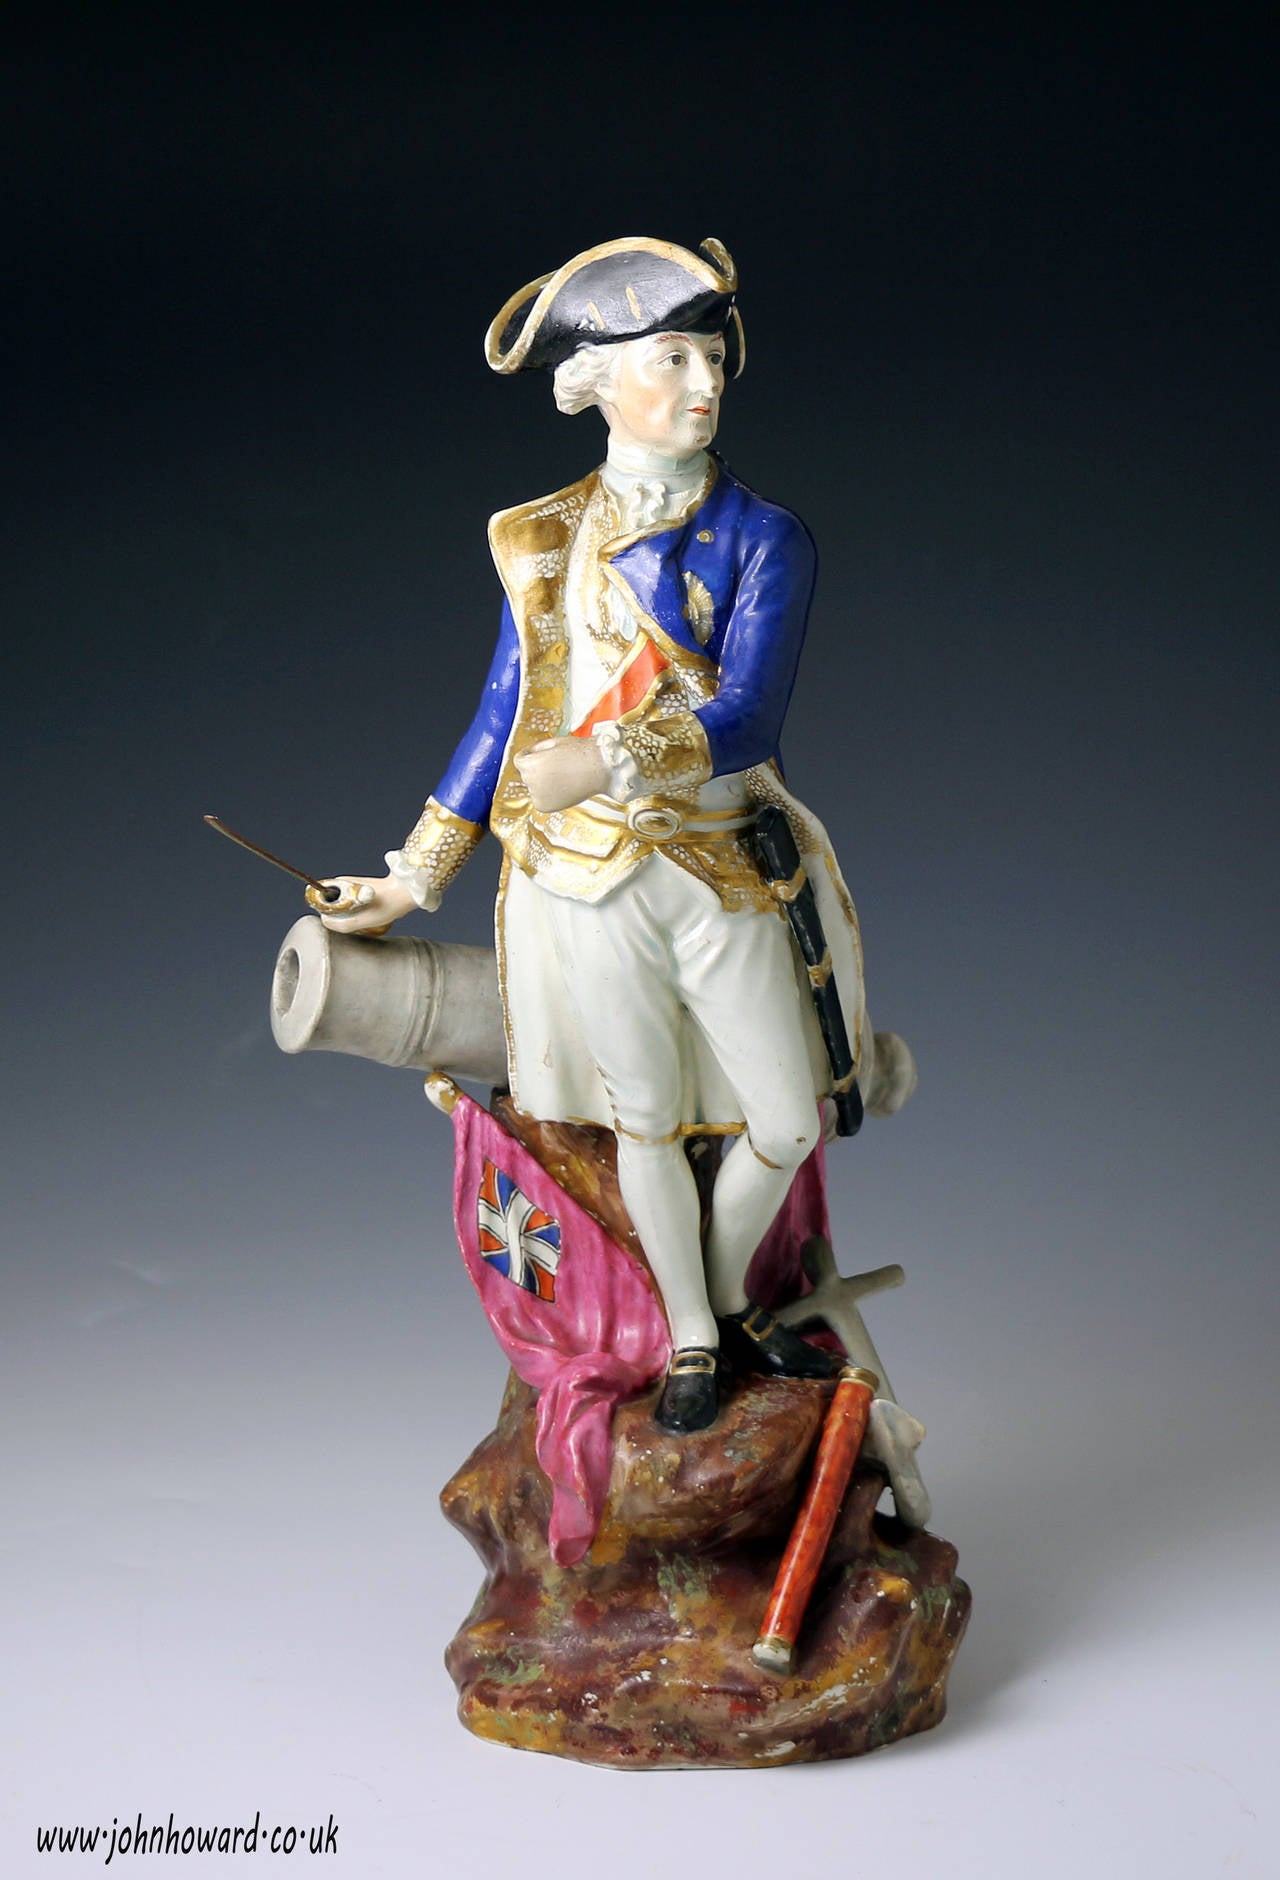 A very rare Staffordshire pottery pearlware figure of Lord Rodney. 
The figure is extremely well modelled and decorated. Rodney is standing on a rocky mound surrounded by flags, a cannon,anchor with a telescope resting by his feet. Rodney is